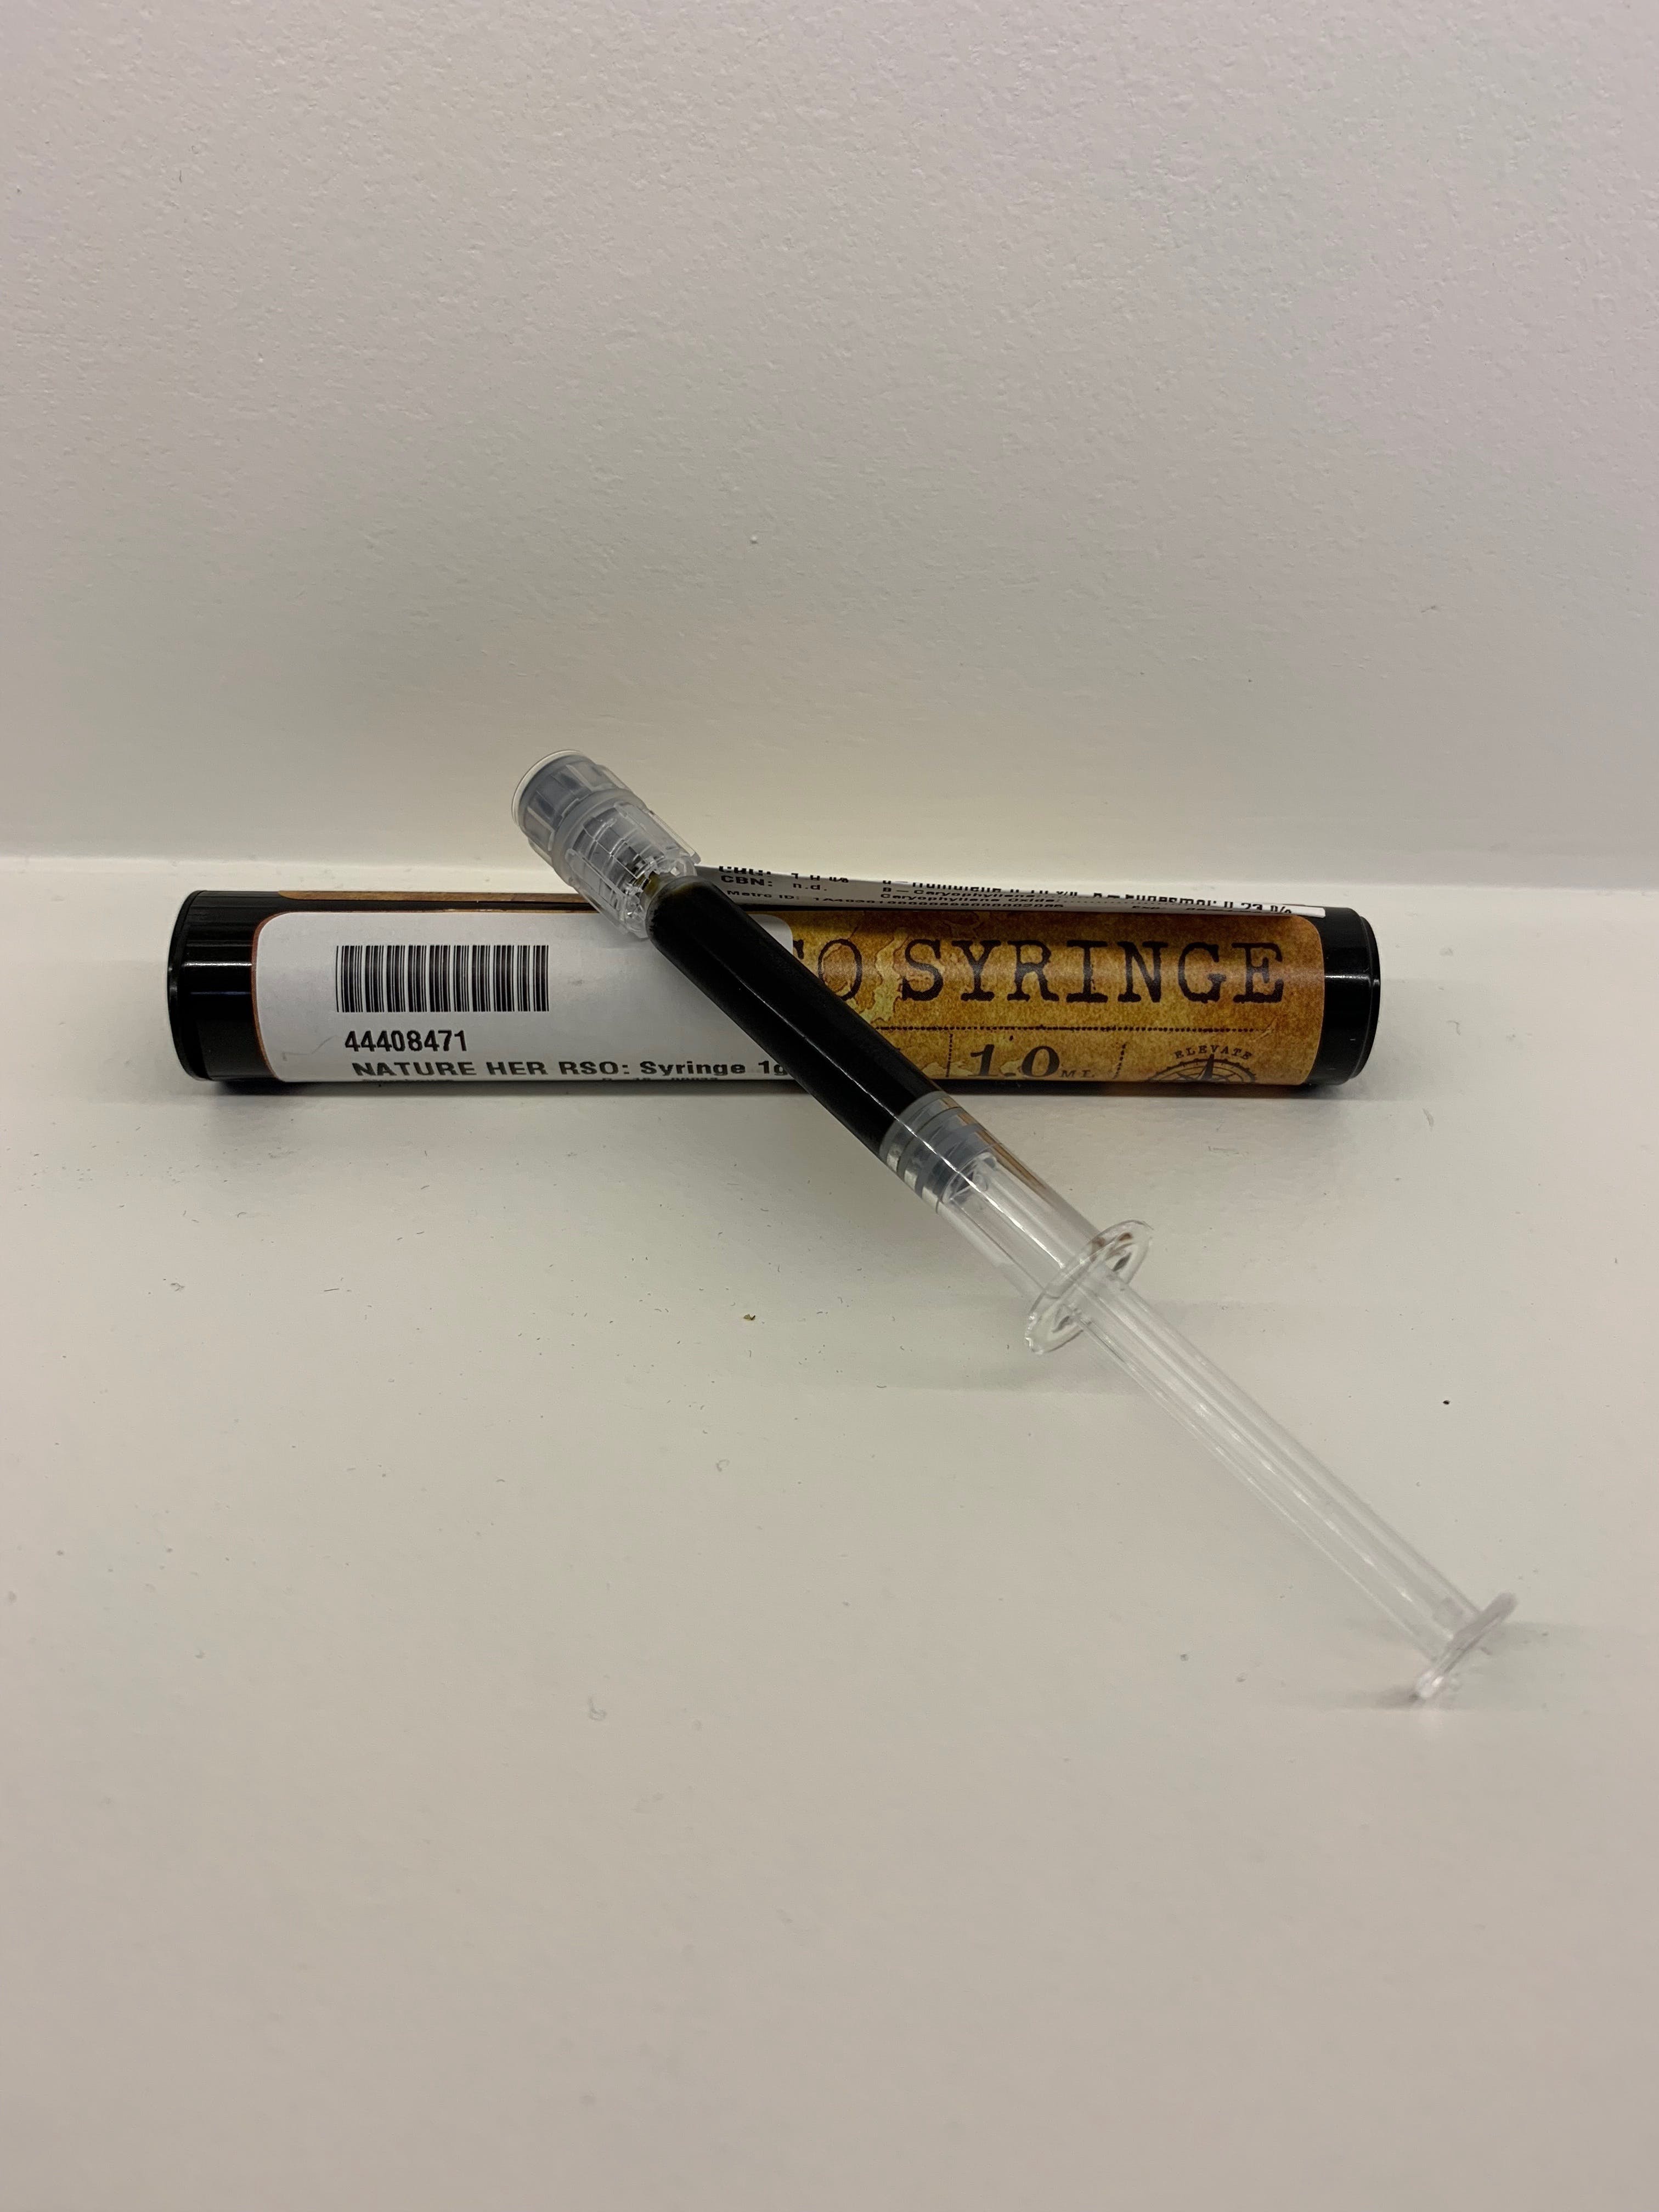 concentrate-nature-her-rso-syringe-1g